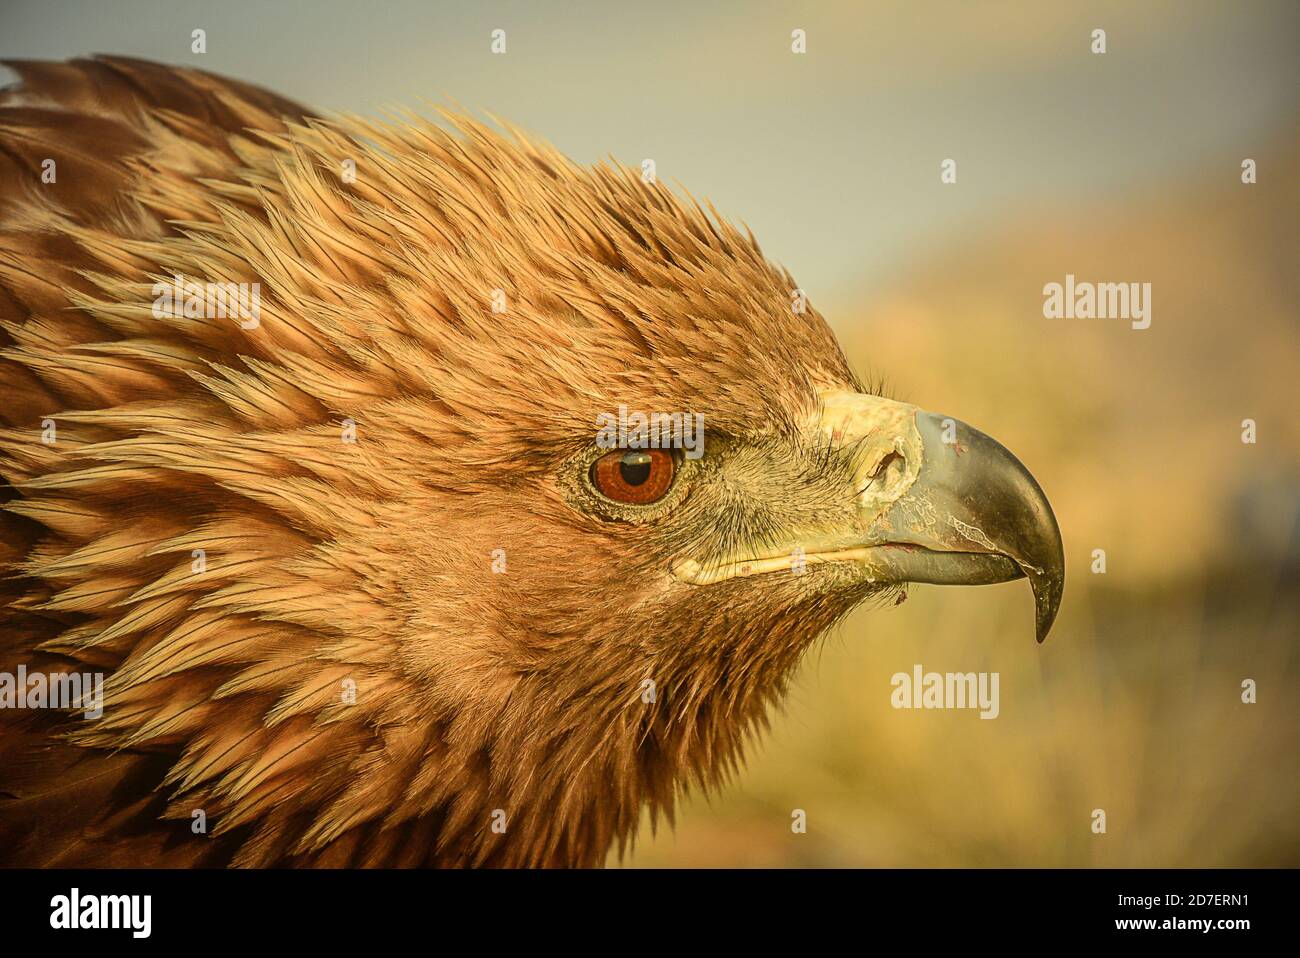 Golden Eagles Face Face High Resolution Stock Photography And Images Alamy